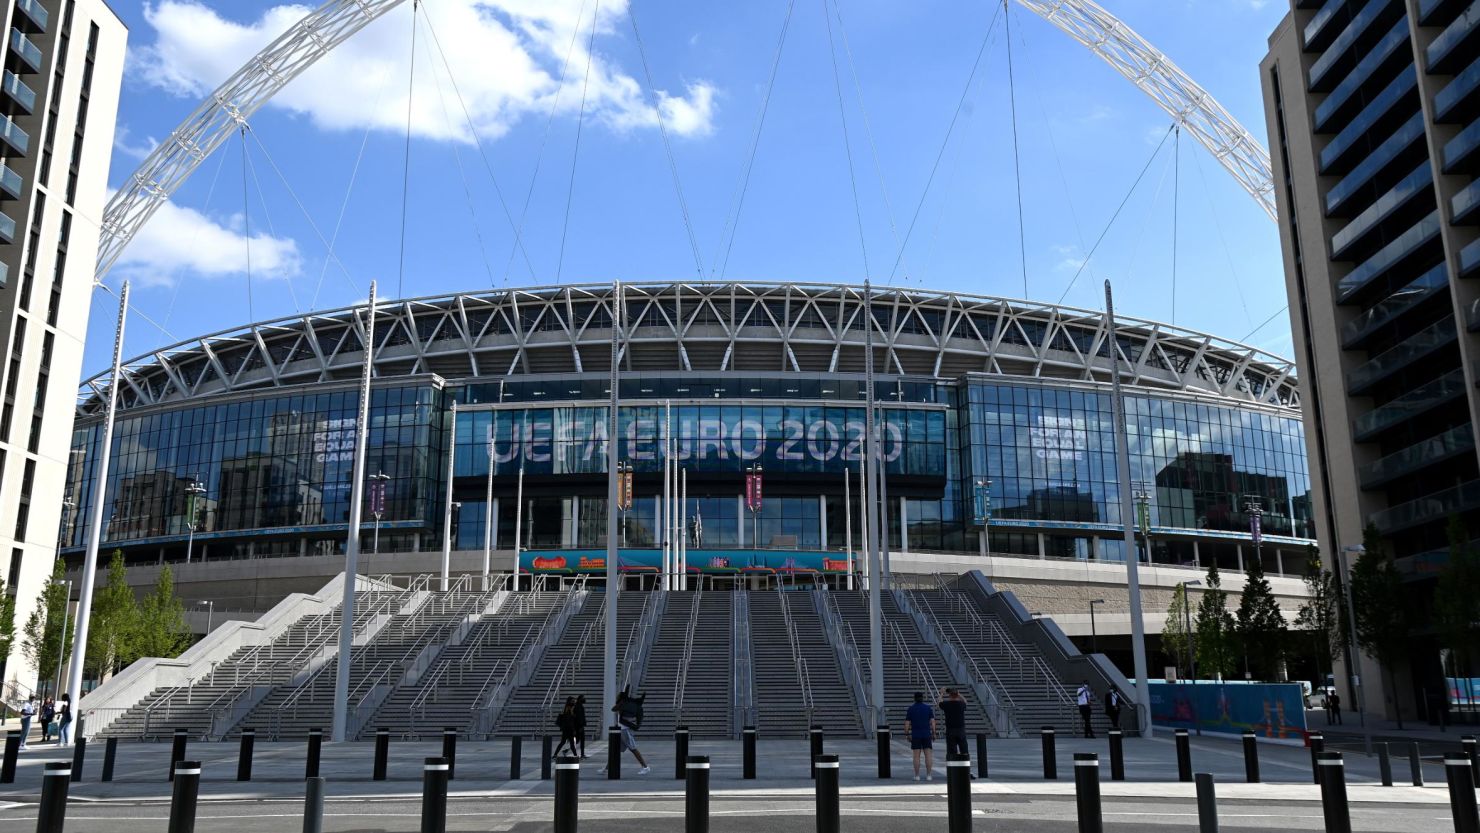 Wembley is due to host the Euro 2020 semifinals and final. 